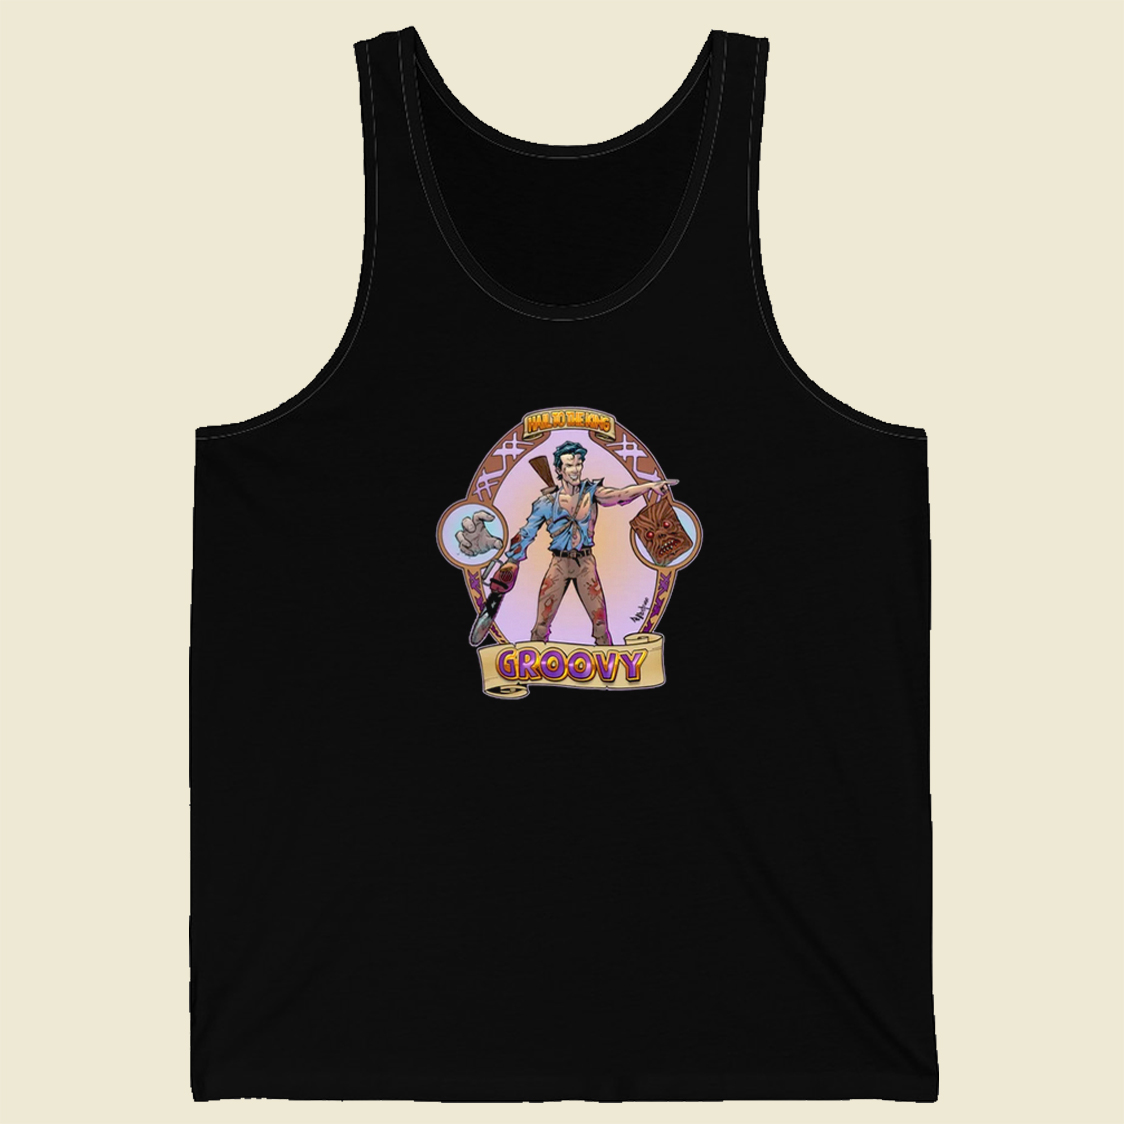 Ash From Evil Dead Groovy Tank Top On Sale | Grltee.com